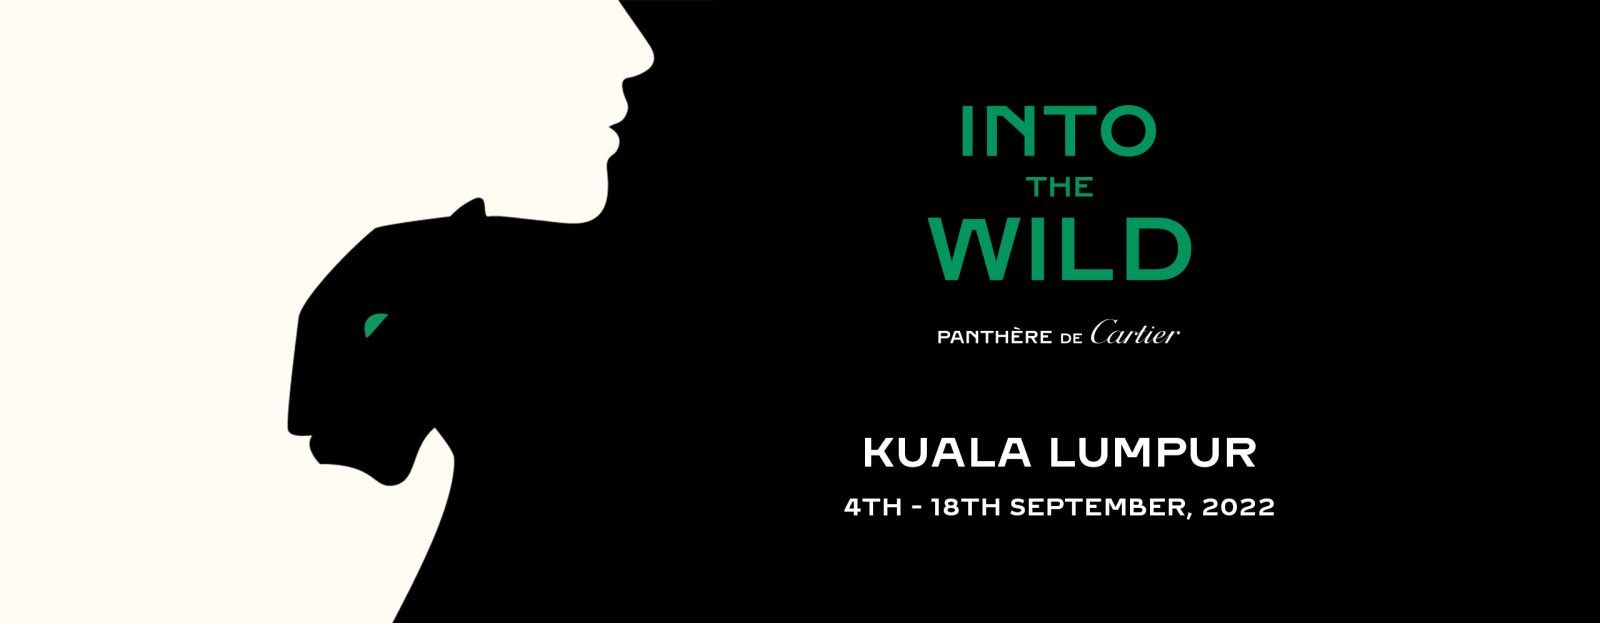 Journey ‘Into The Wild’ with Panthère de Cartier from 4 to 18 September